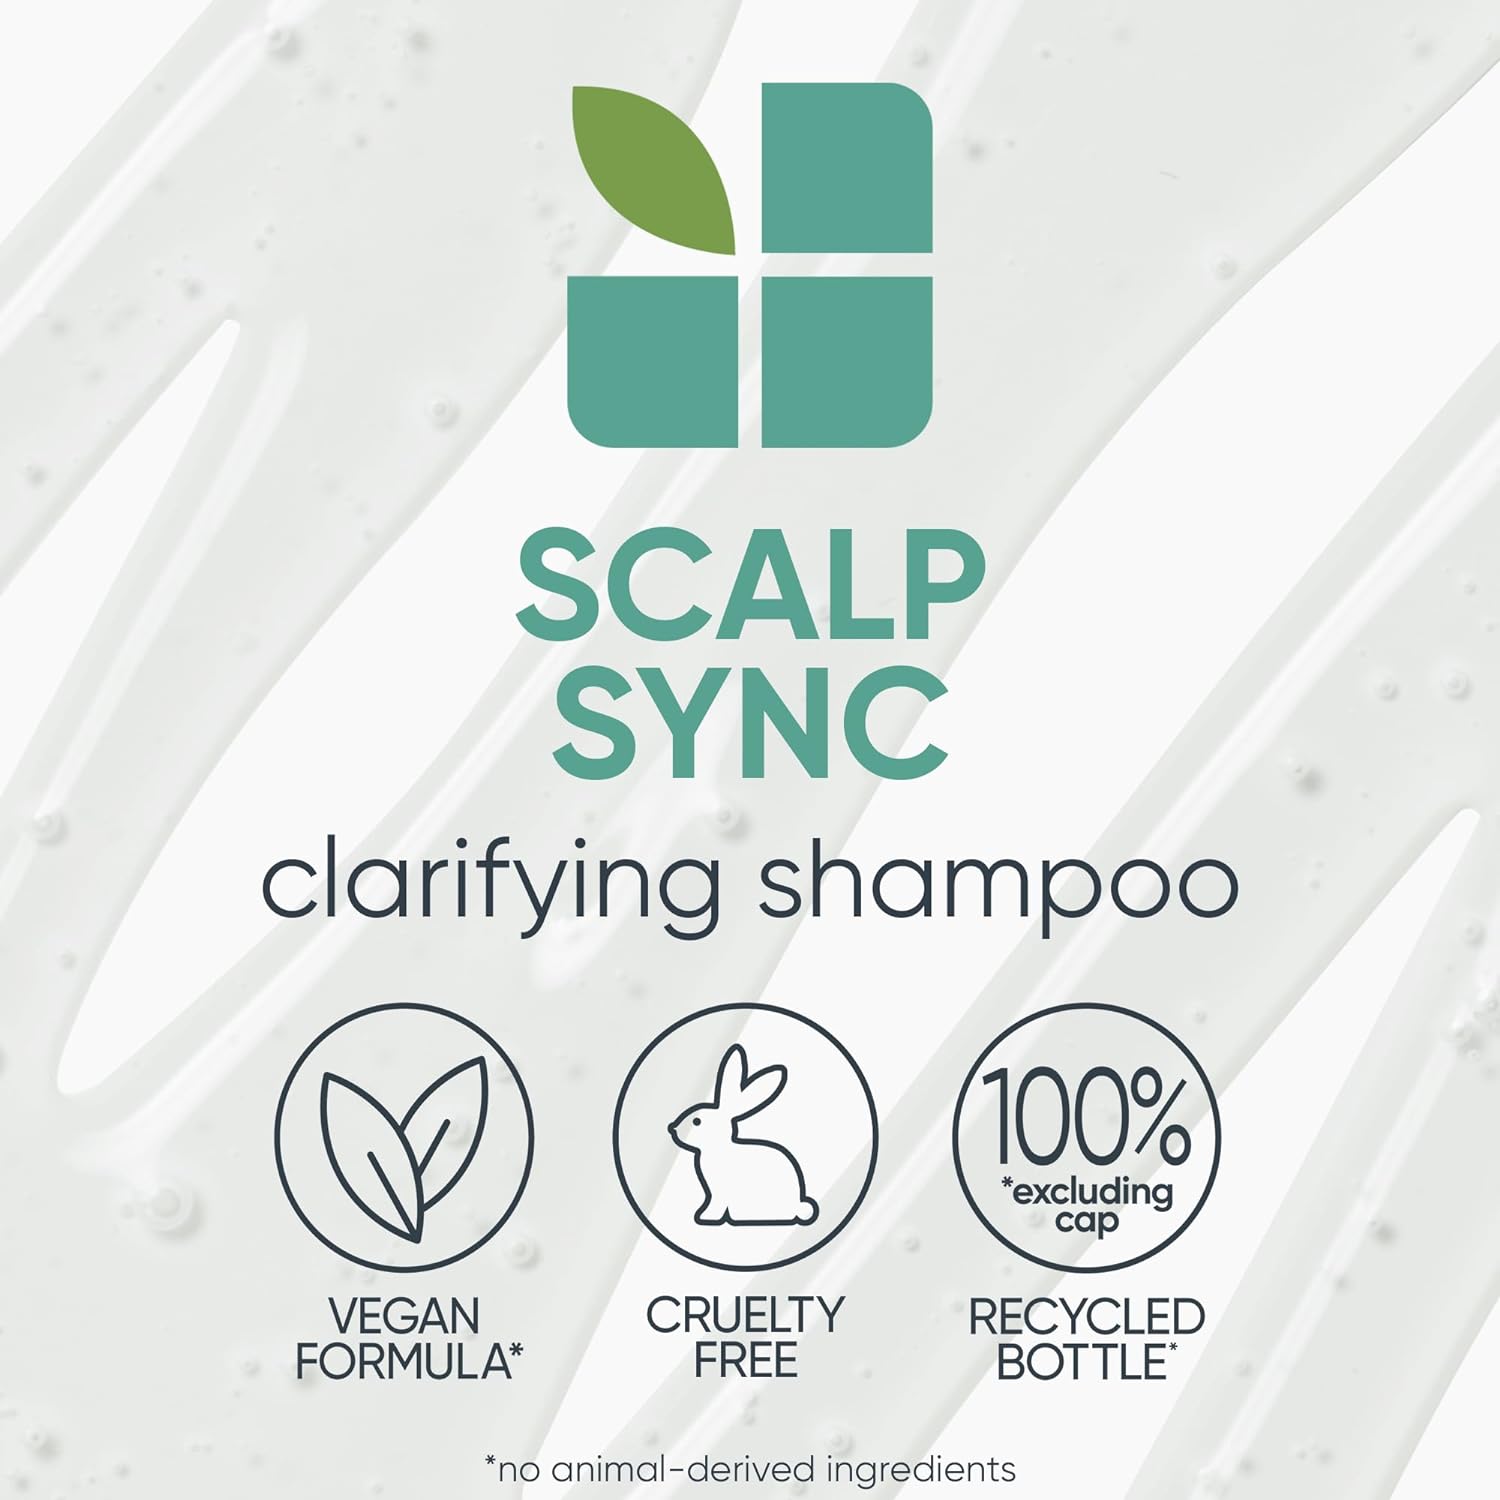 Biolage Scalp Sync Clarifying Shampoo | Removes Residue, Buildup & Excess Oil | Paraben & Silicone Free | For Oily Hair & Scalp | Vegan | Clarifying Salon Shampoo : Beauty & Personal Care